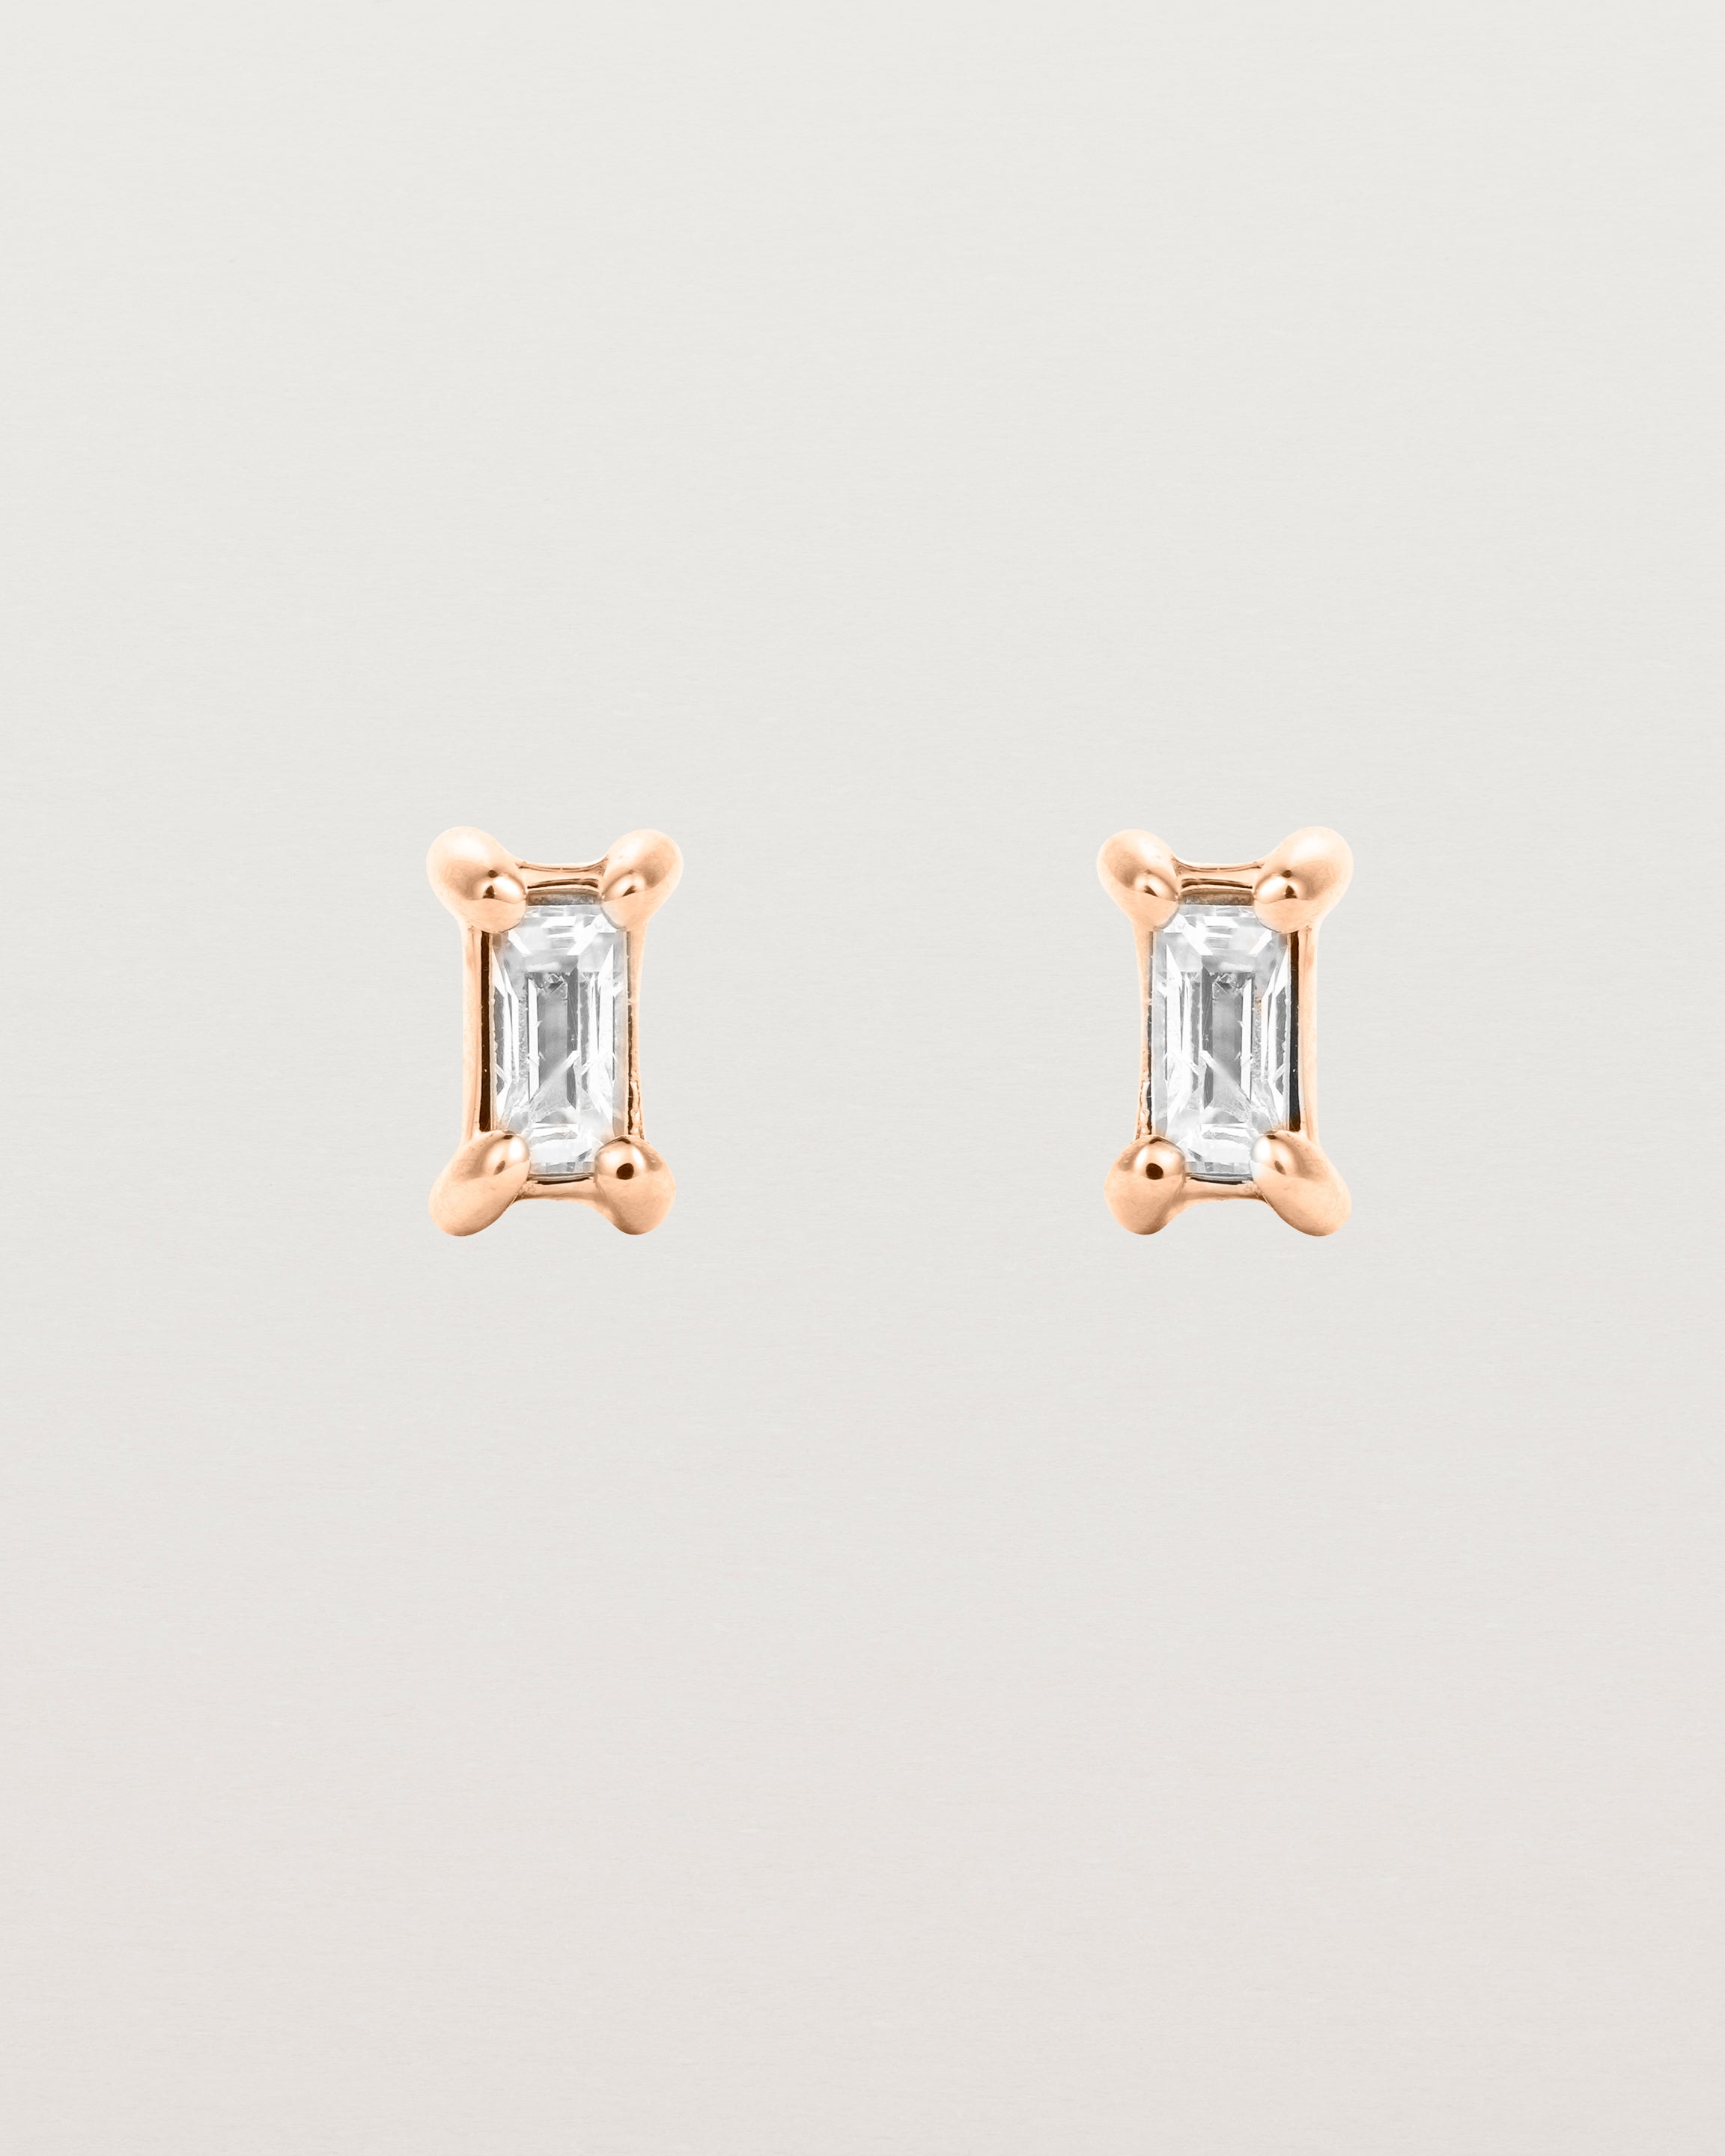 A pair of rose gold studs featuring an emerald cut white diamond